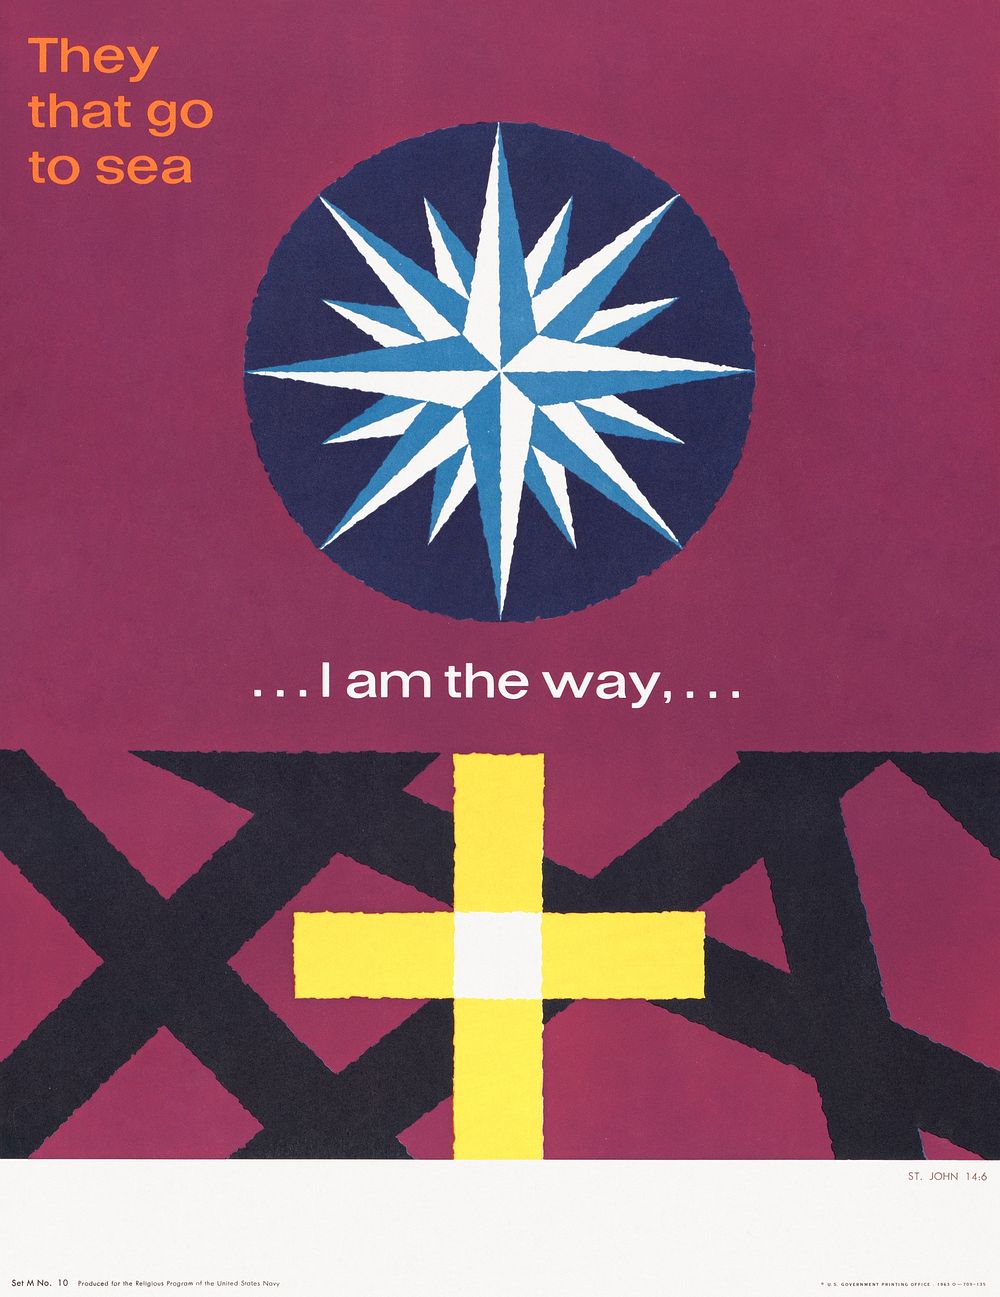 I am the way... St. John 14:6. (1963) vintage poster by Joseph Binder. Original public domain image from the Library of…